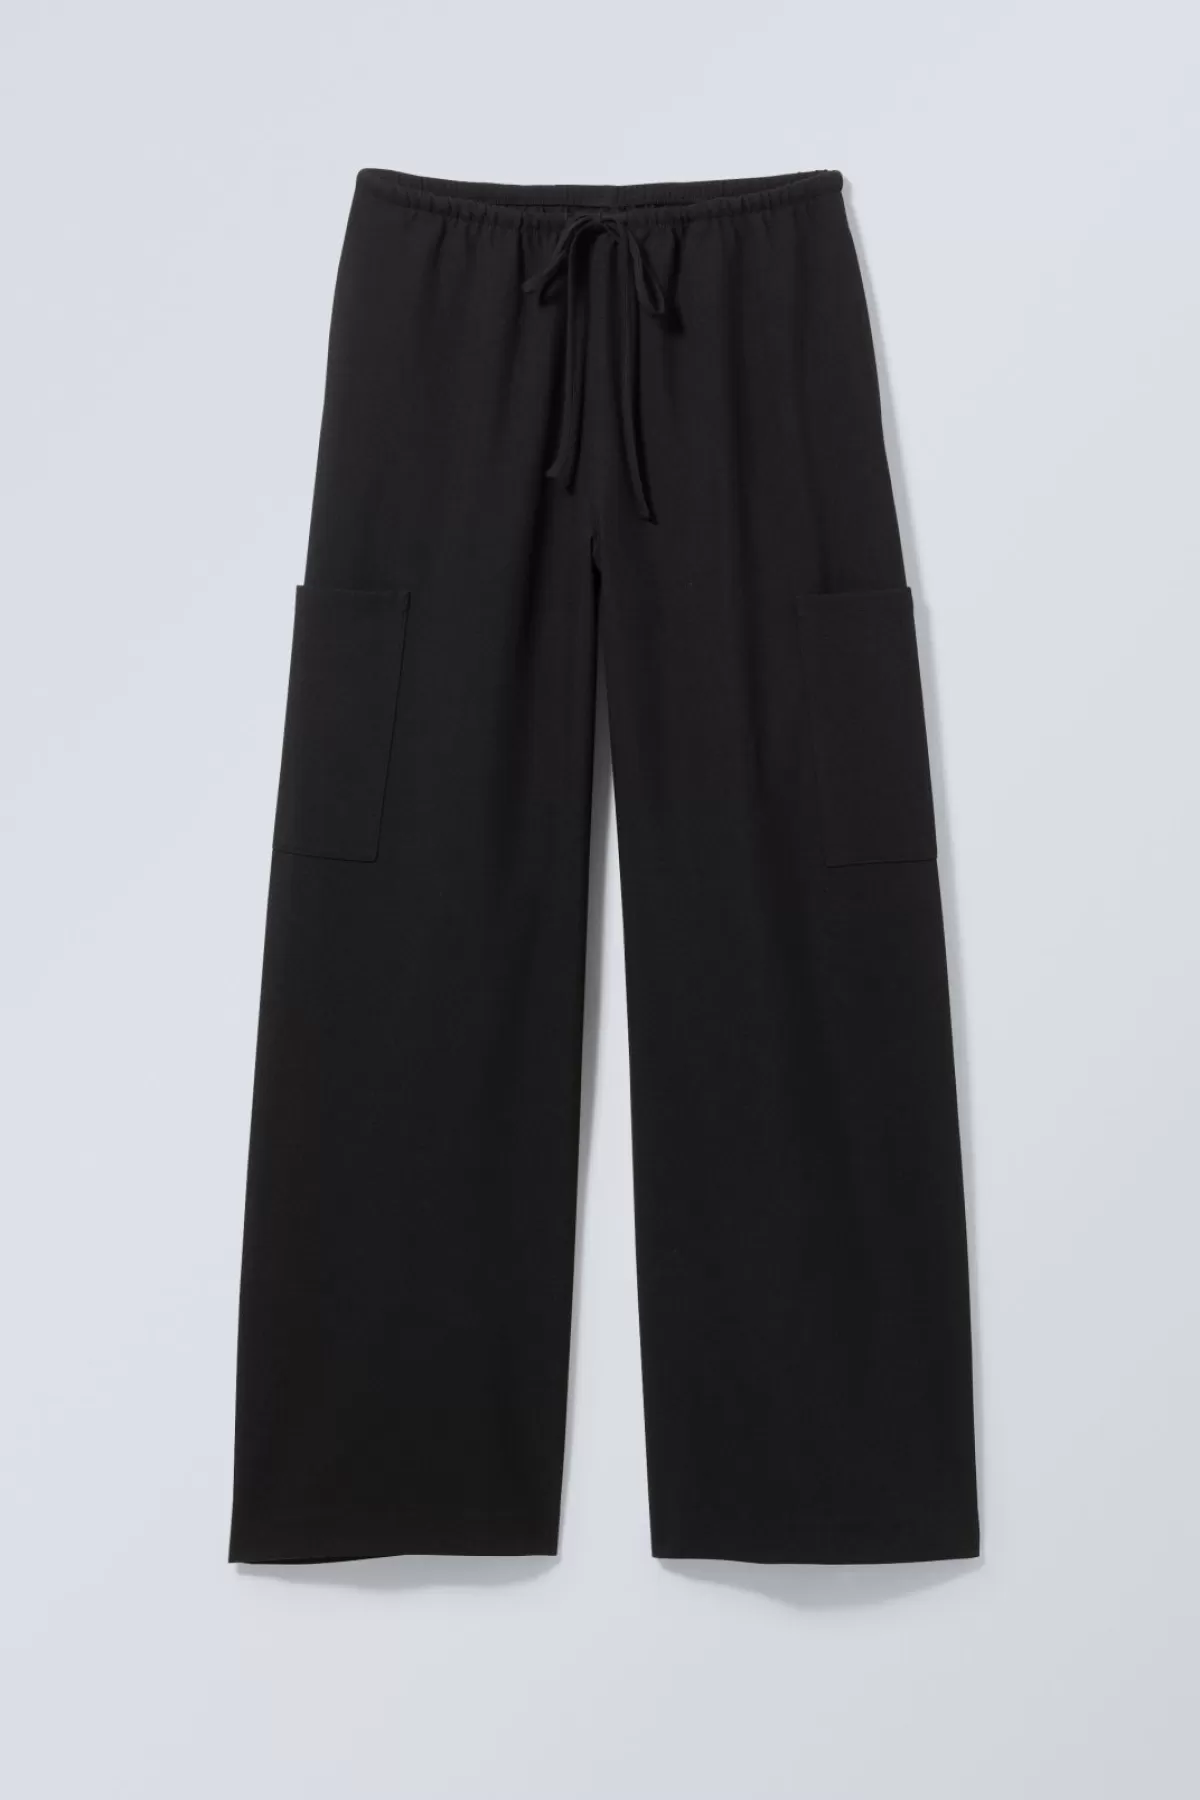 Weekday Adisa Suiting Cargo Trousers Black Cheap